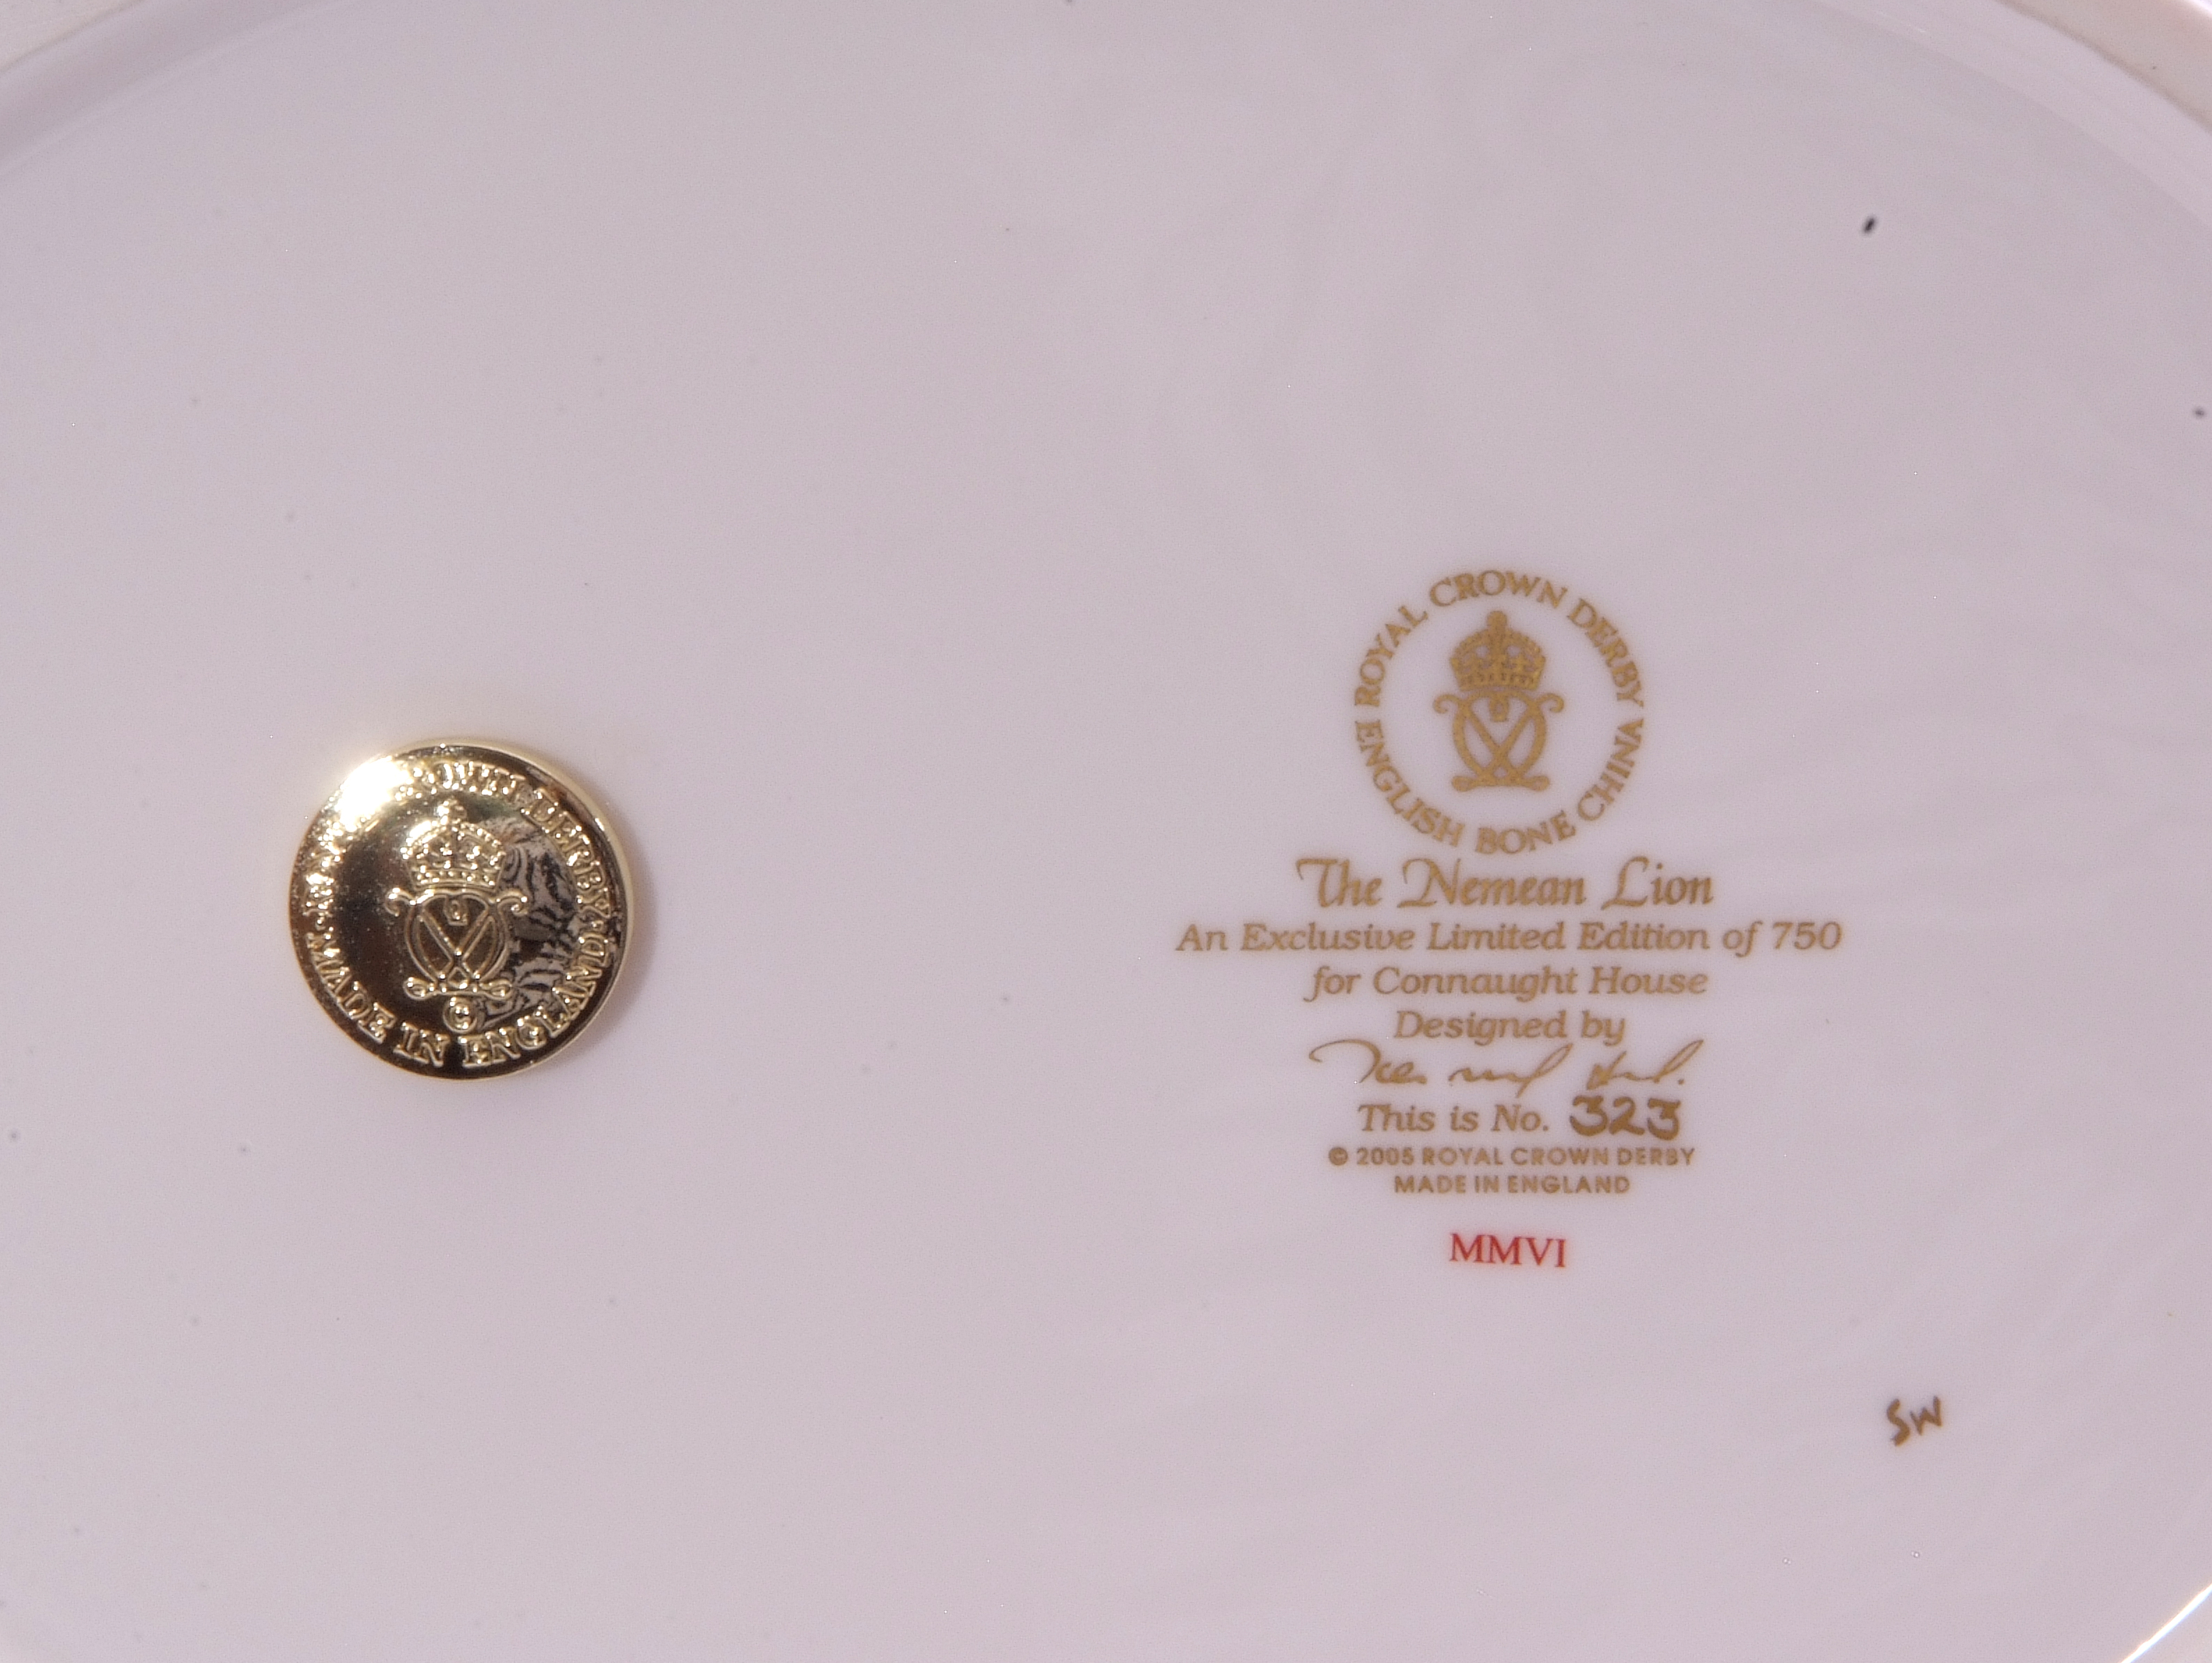 Two Royal Crown Derby paperweights, one of the Nemean lion, limited edition of 750, this example - Image 7 of 8